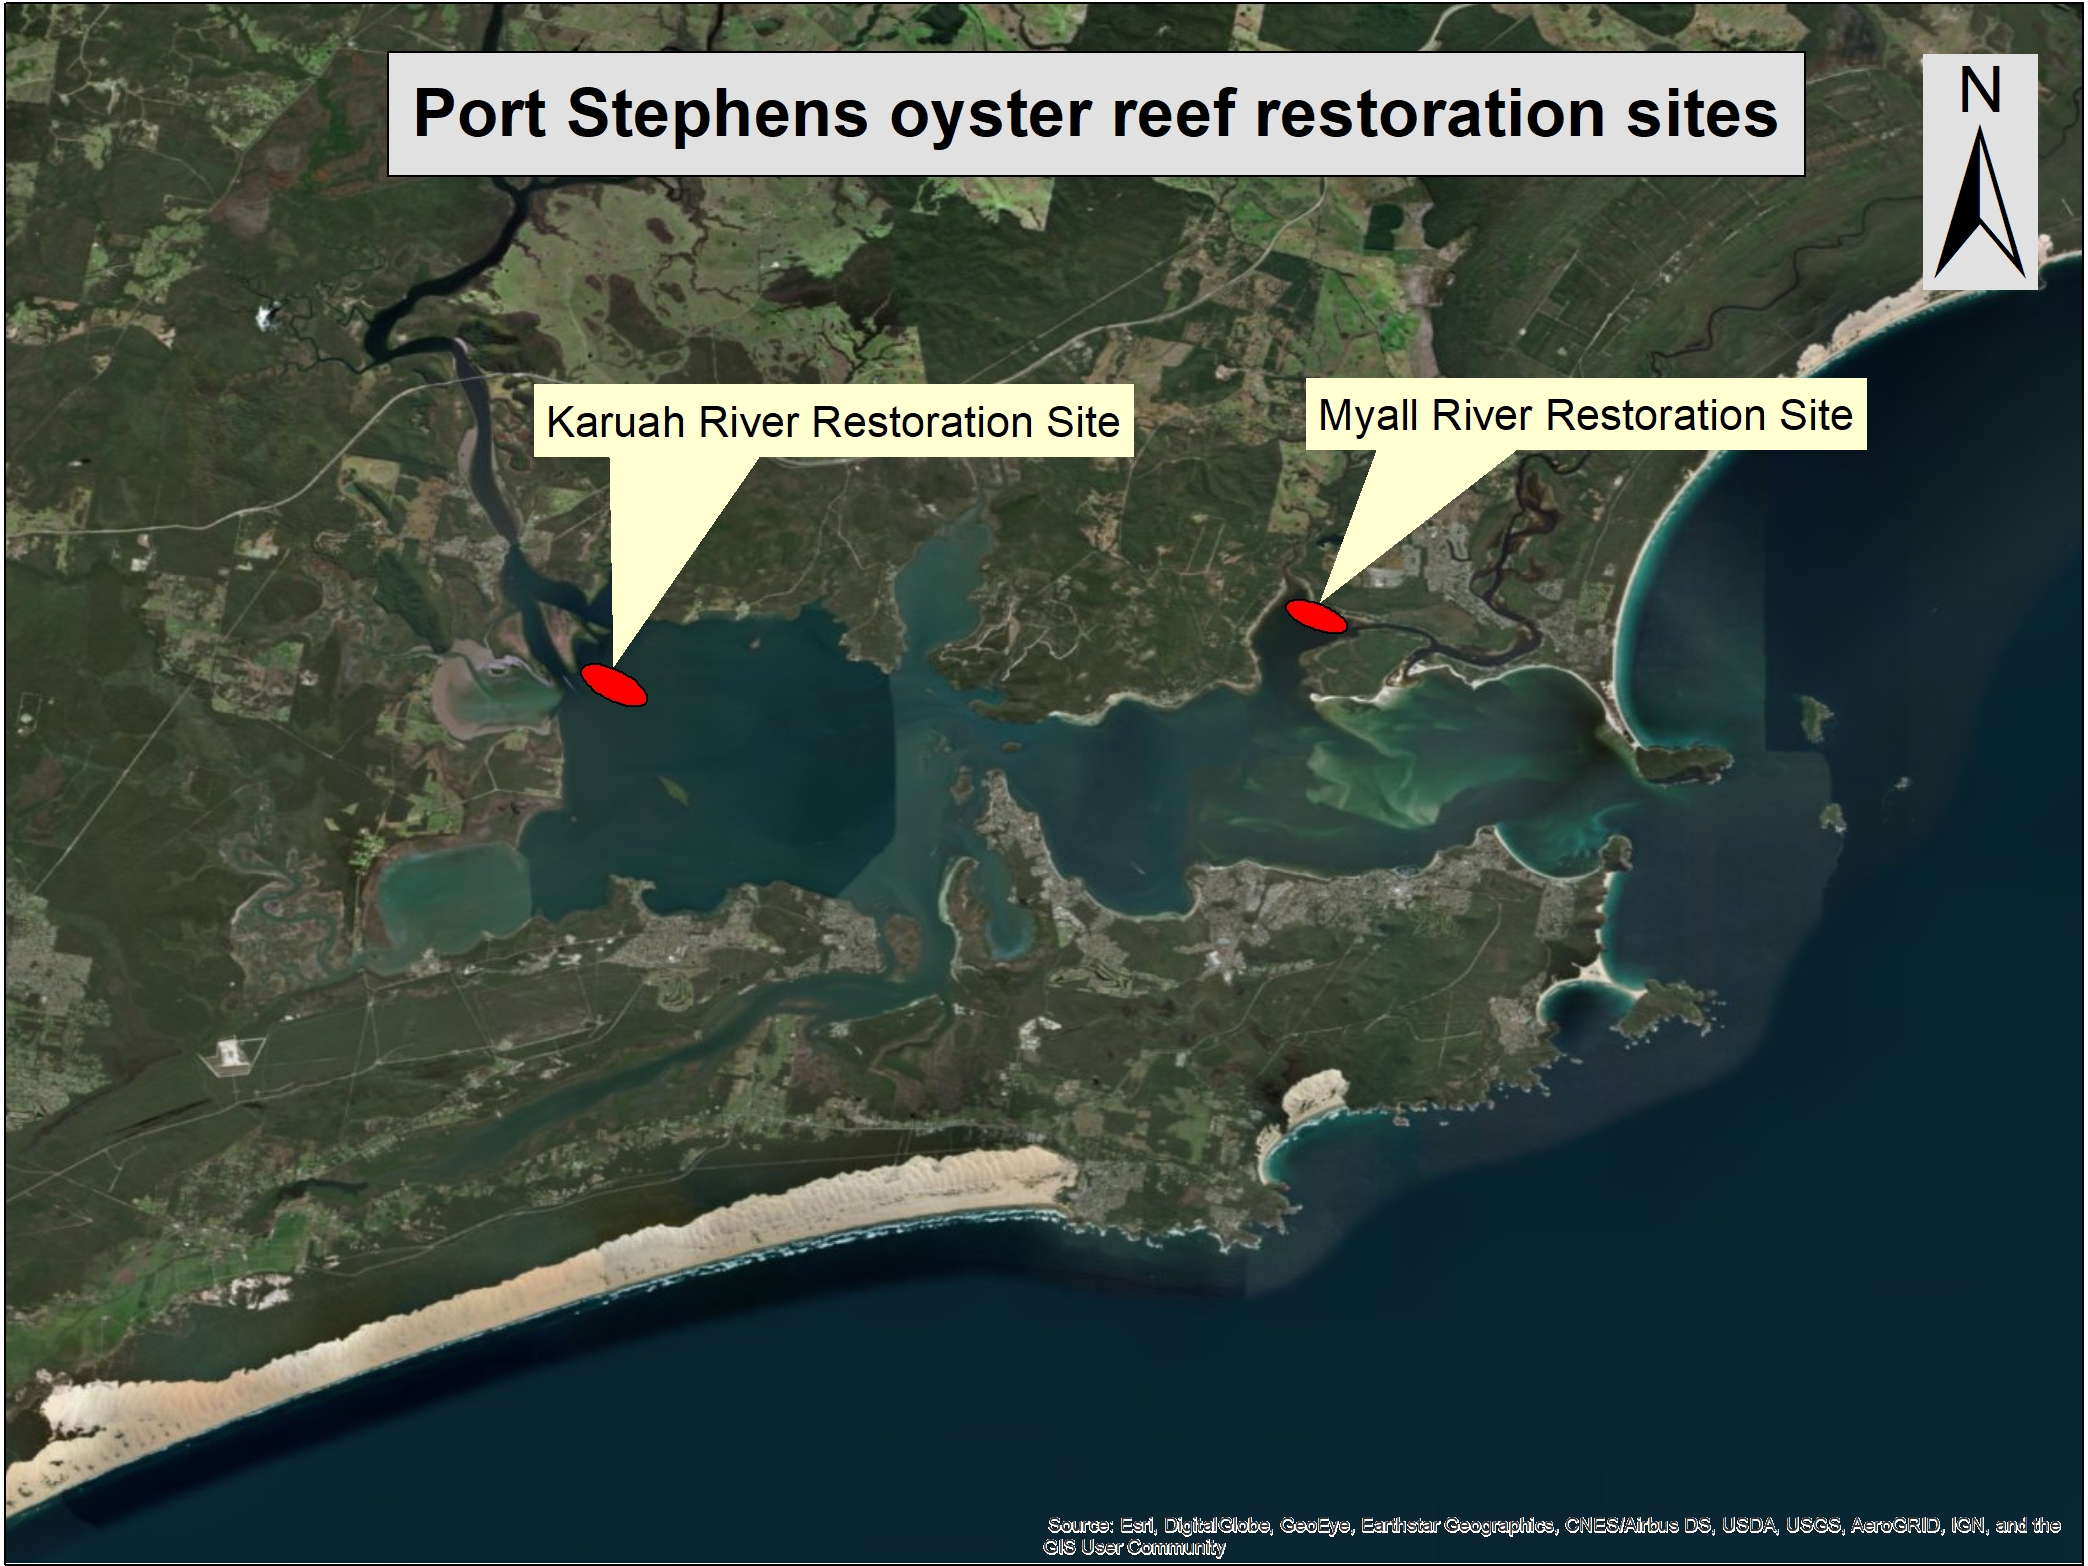 A map view of oyster reef restoration sites in Port Stephens